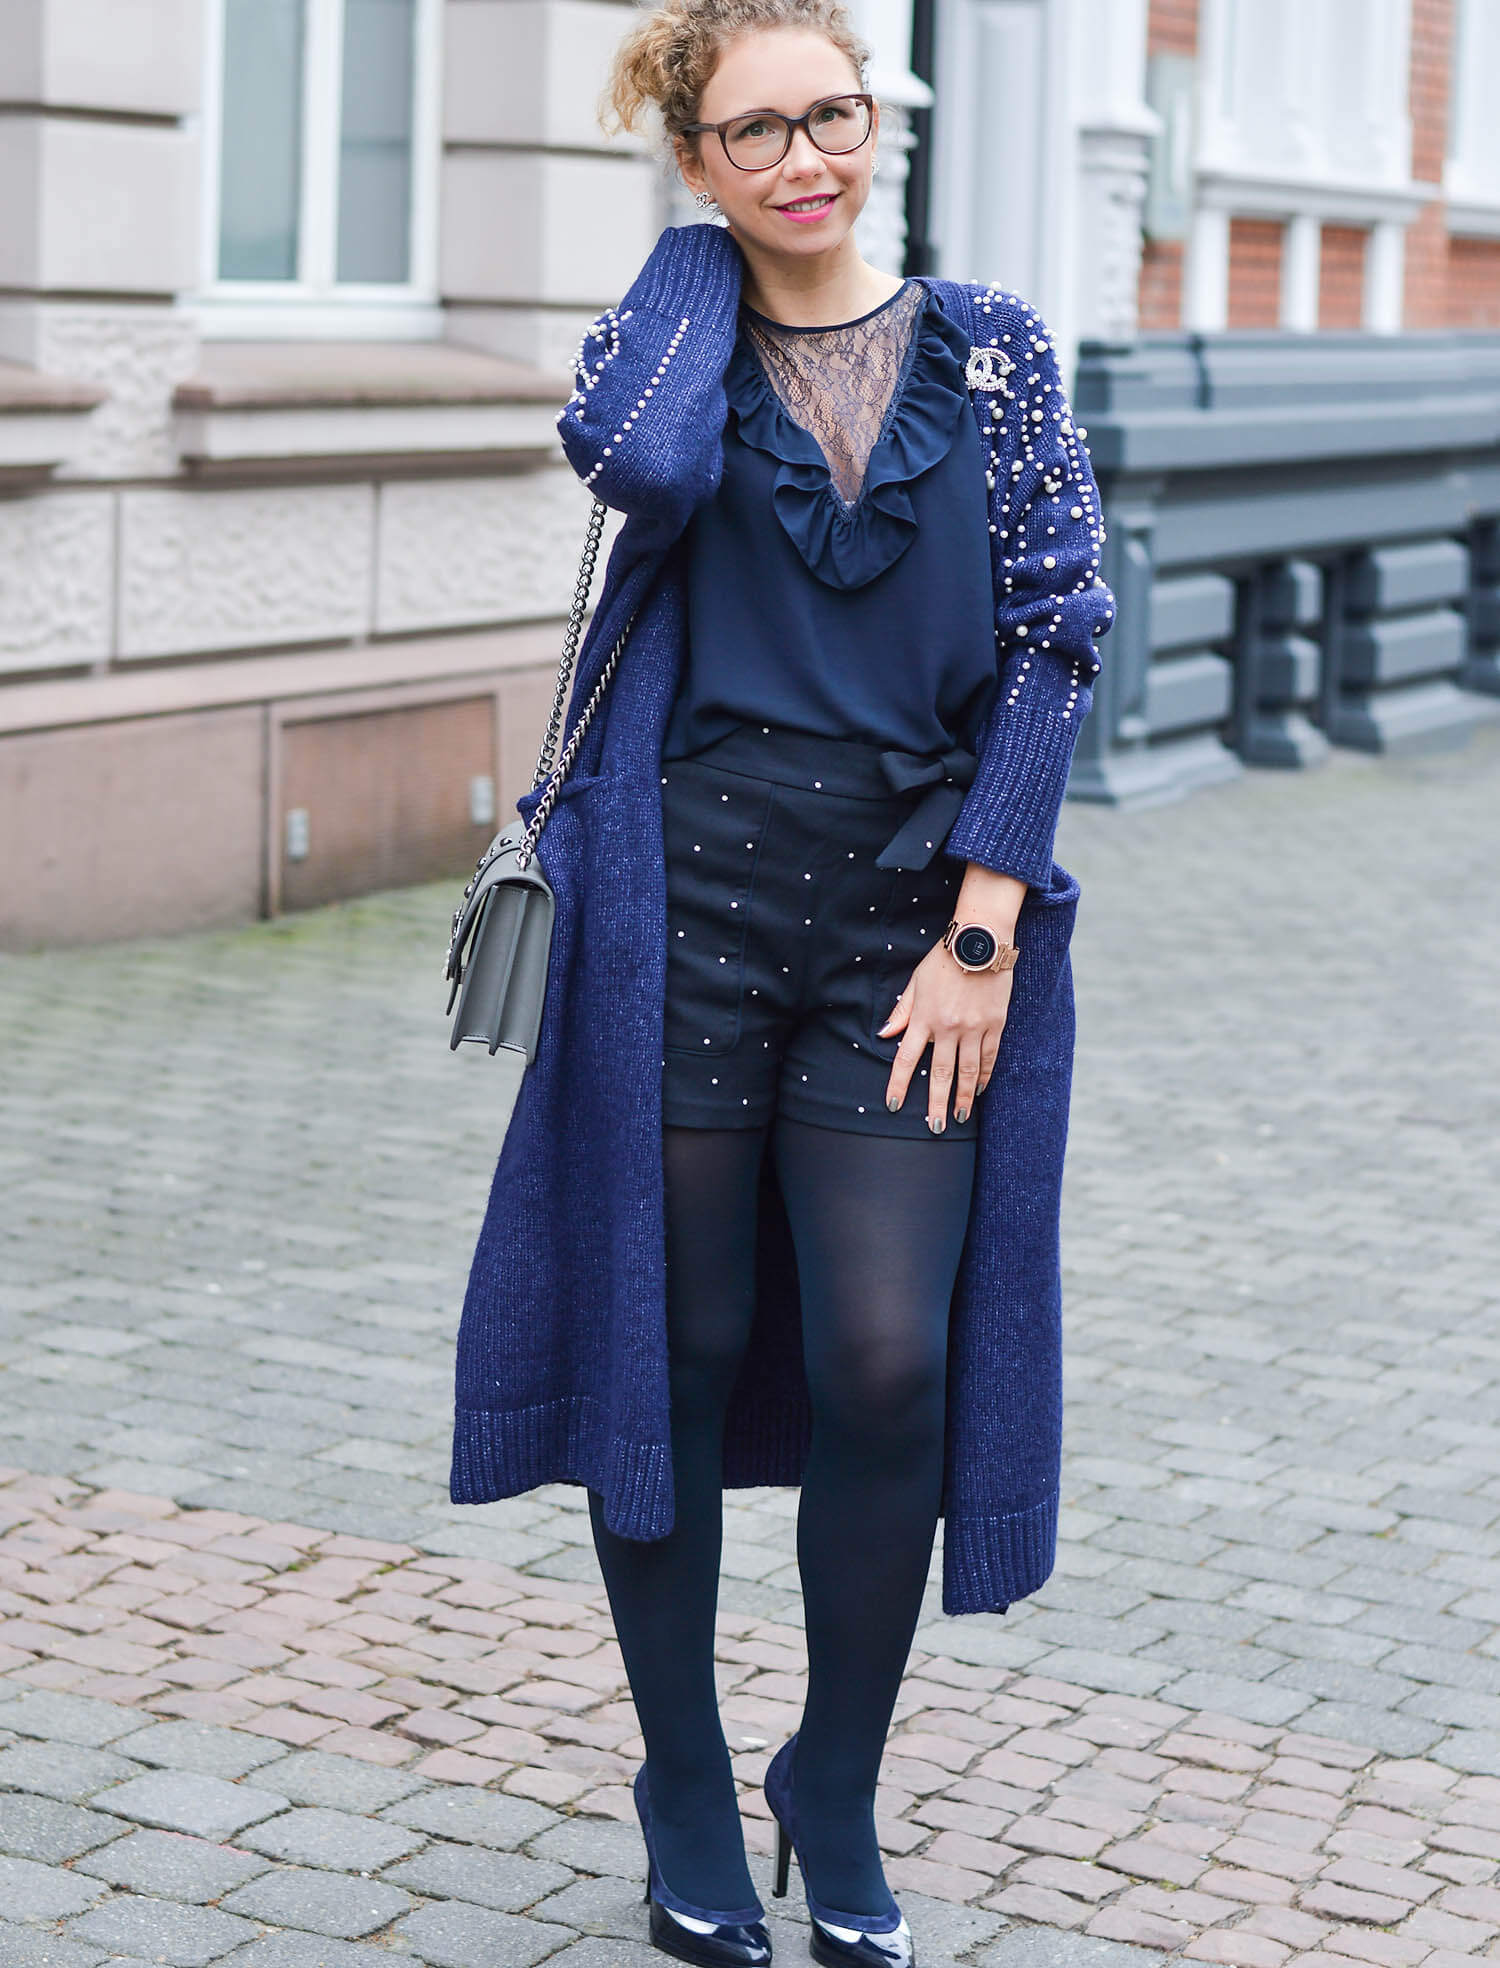 Kationette-Outfit-Zara-Long-Cardigan-with-pearls-Michael-Kors-Access-Sofie-Smartwatch-and-Pinko-Bag-fashionblogger-nrw